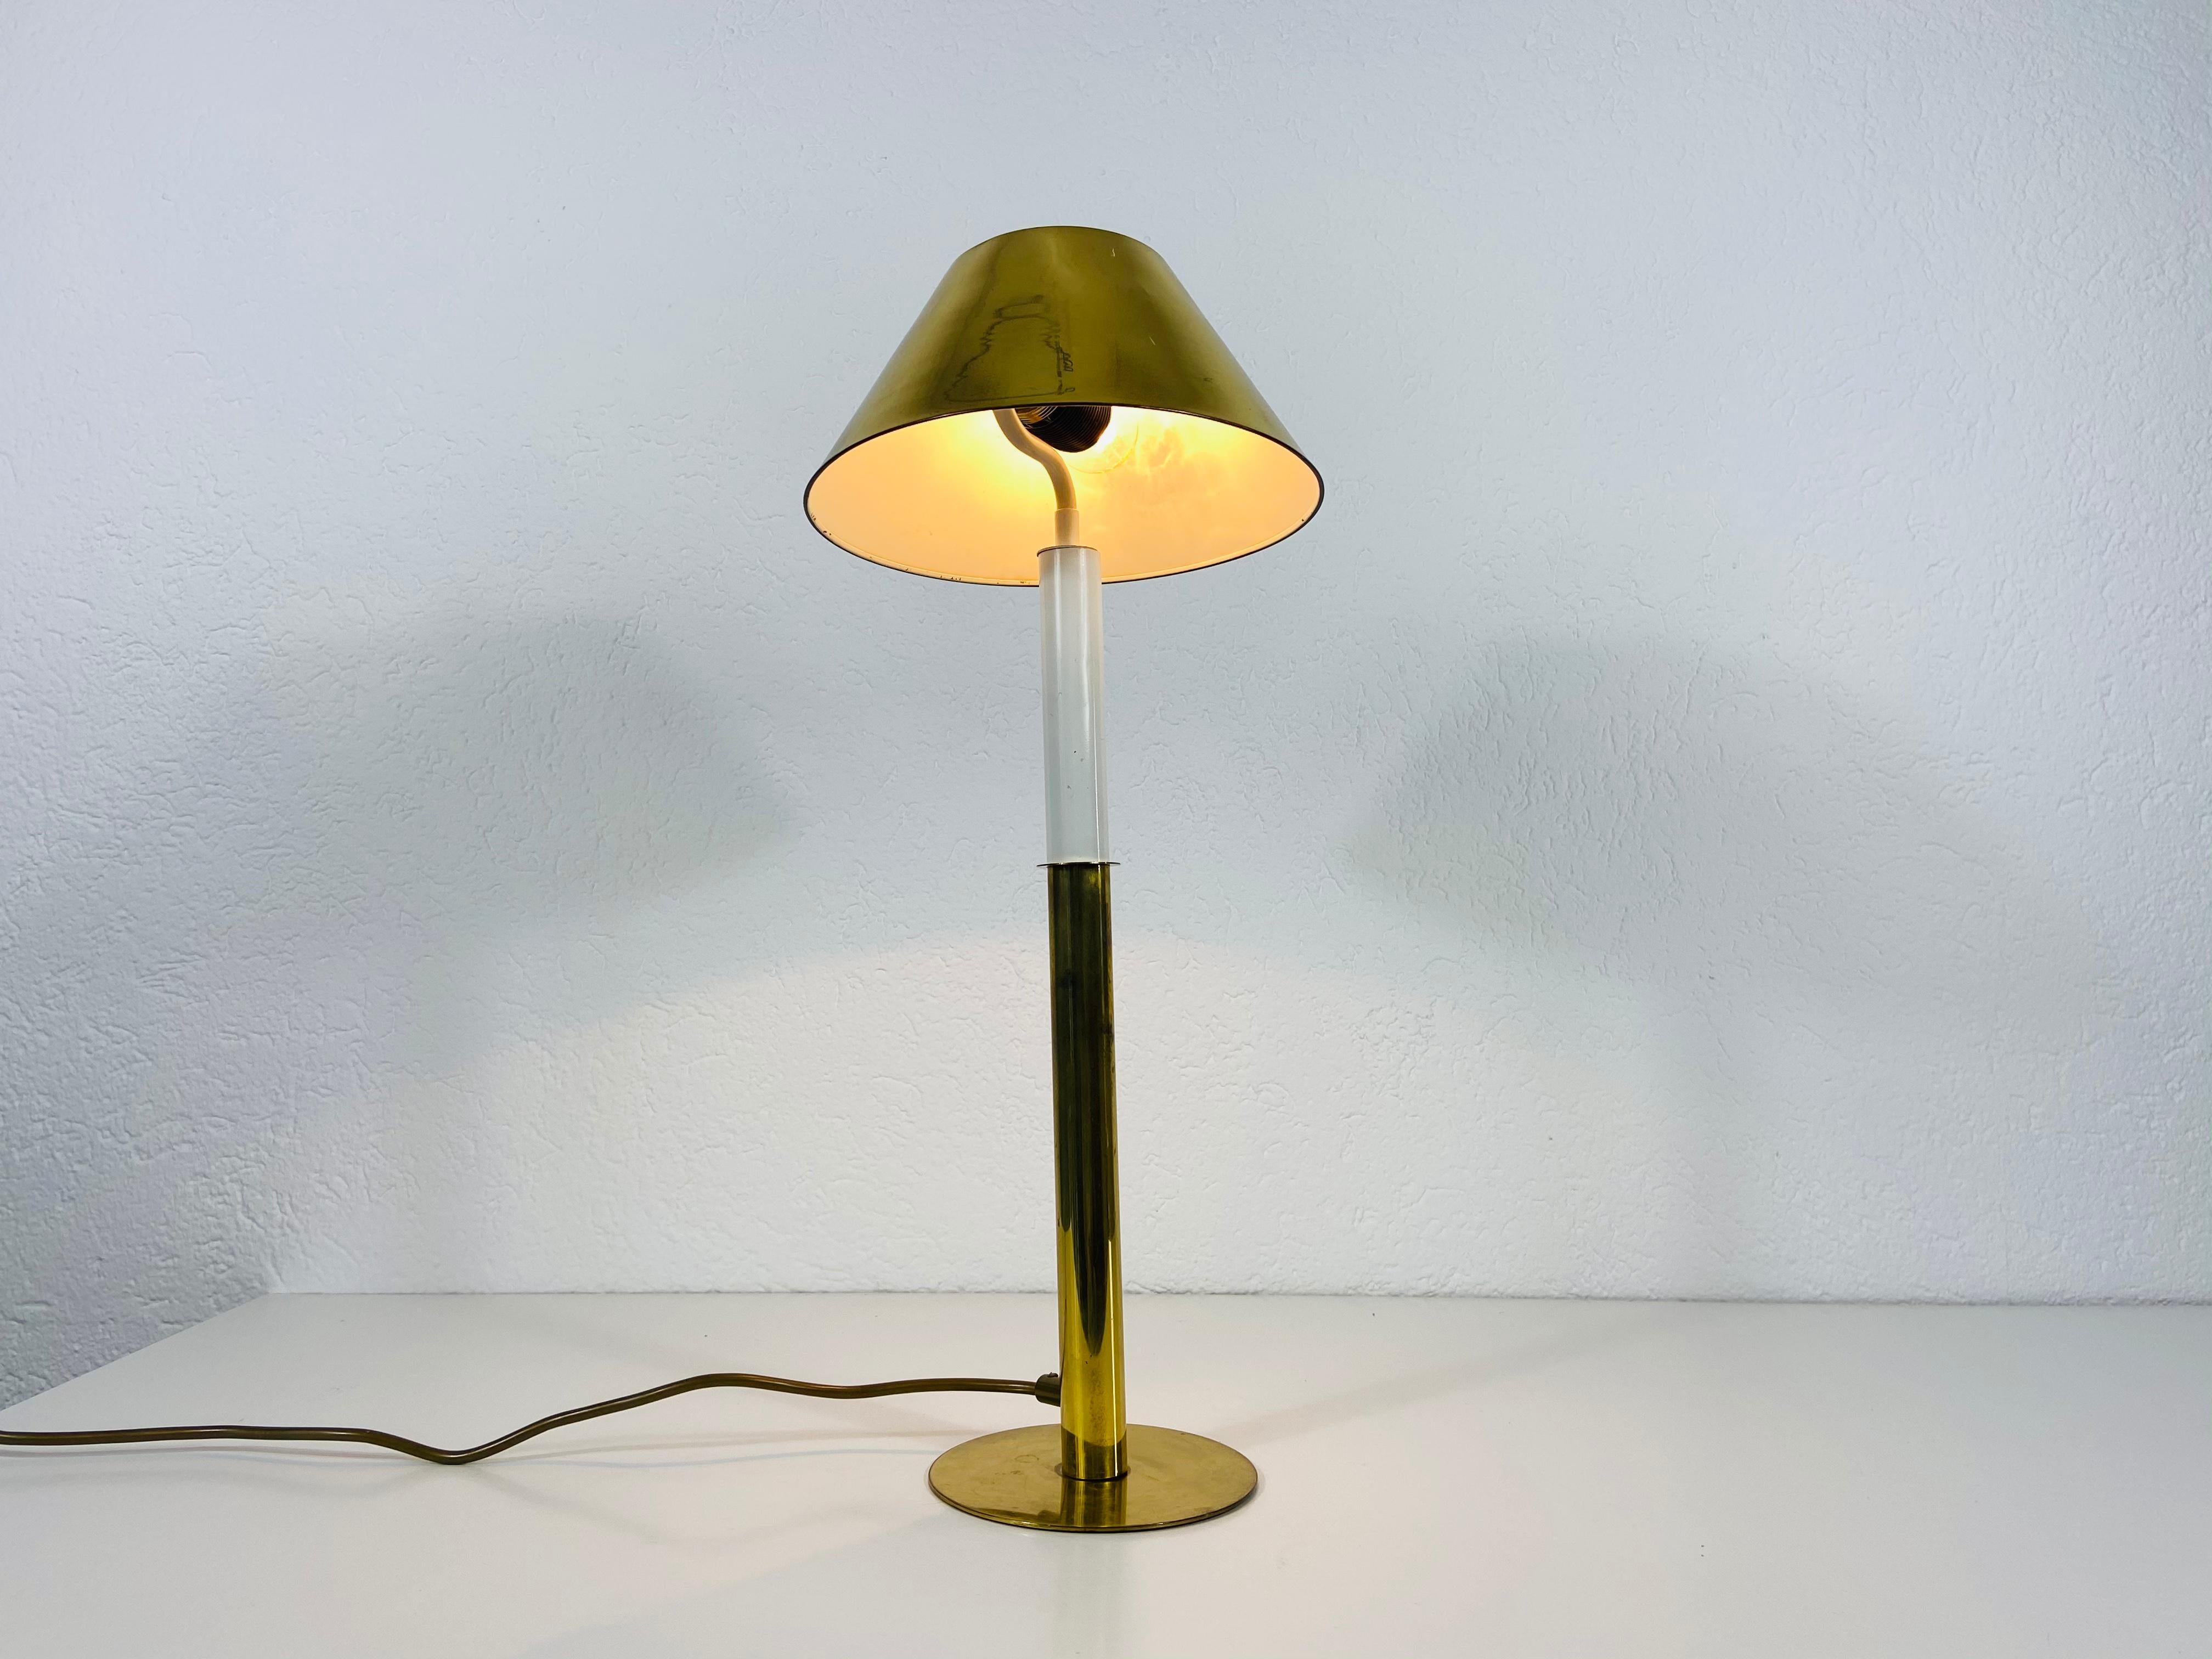 An German table lamp made in the 1960s. Made by solid brass. 

The light requires one E27 light bulb. Good vintage condition.

Free worldwide shipping.